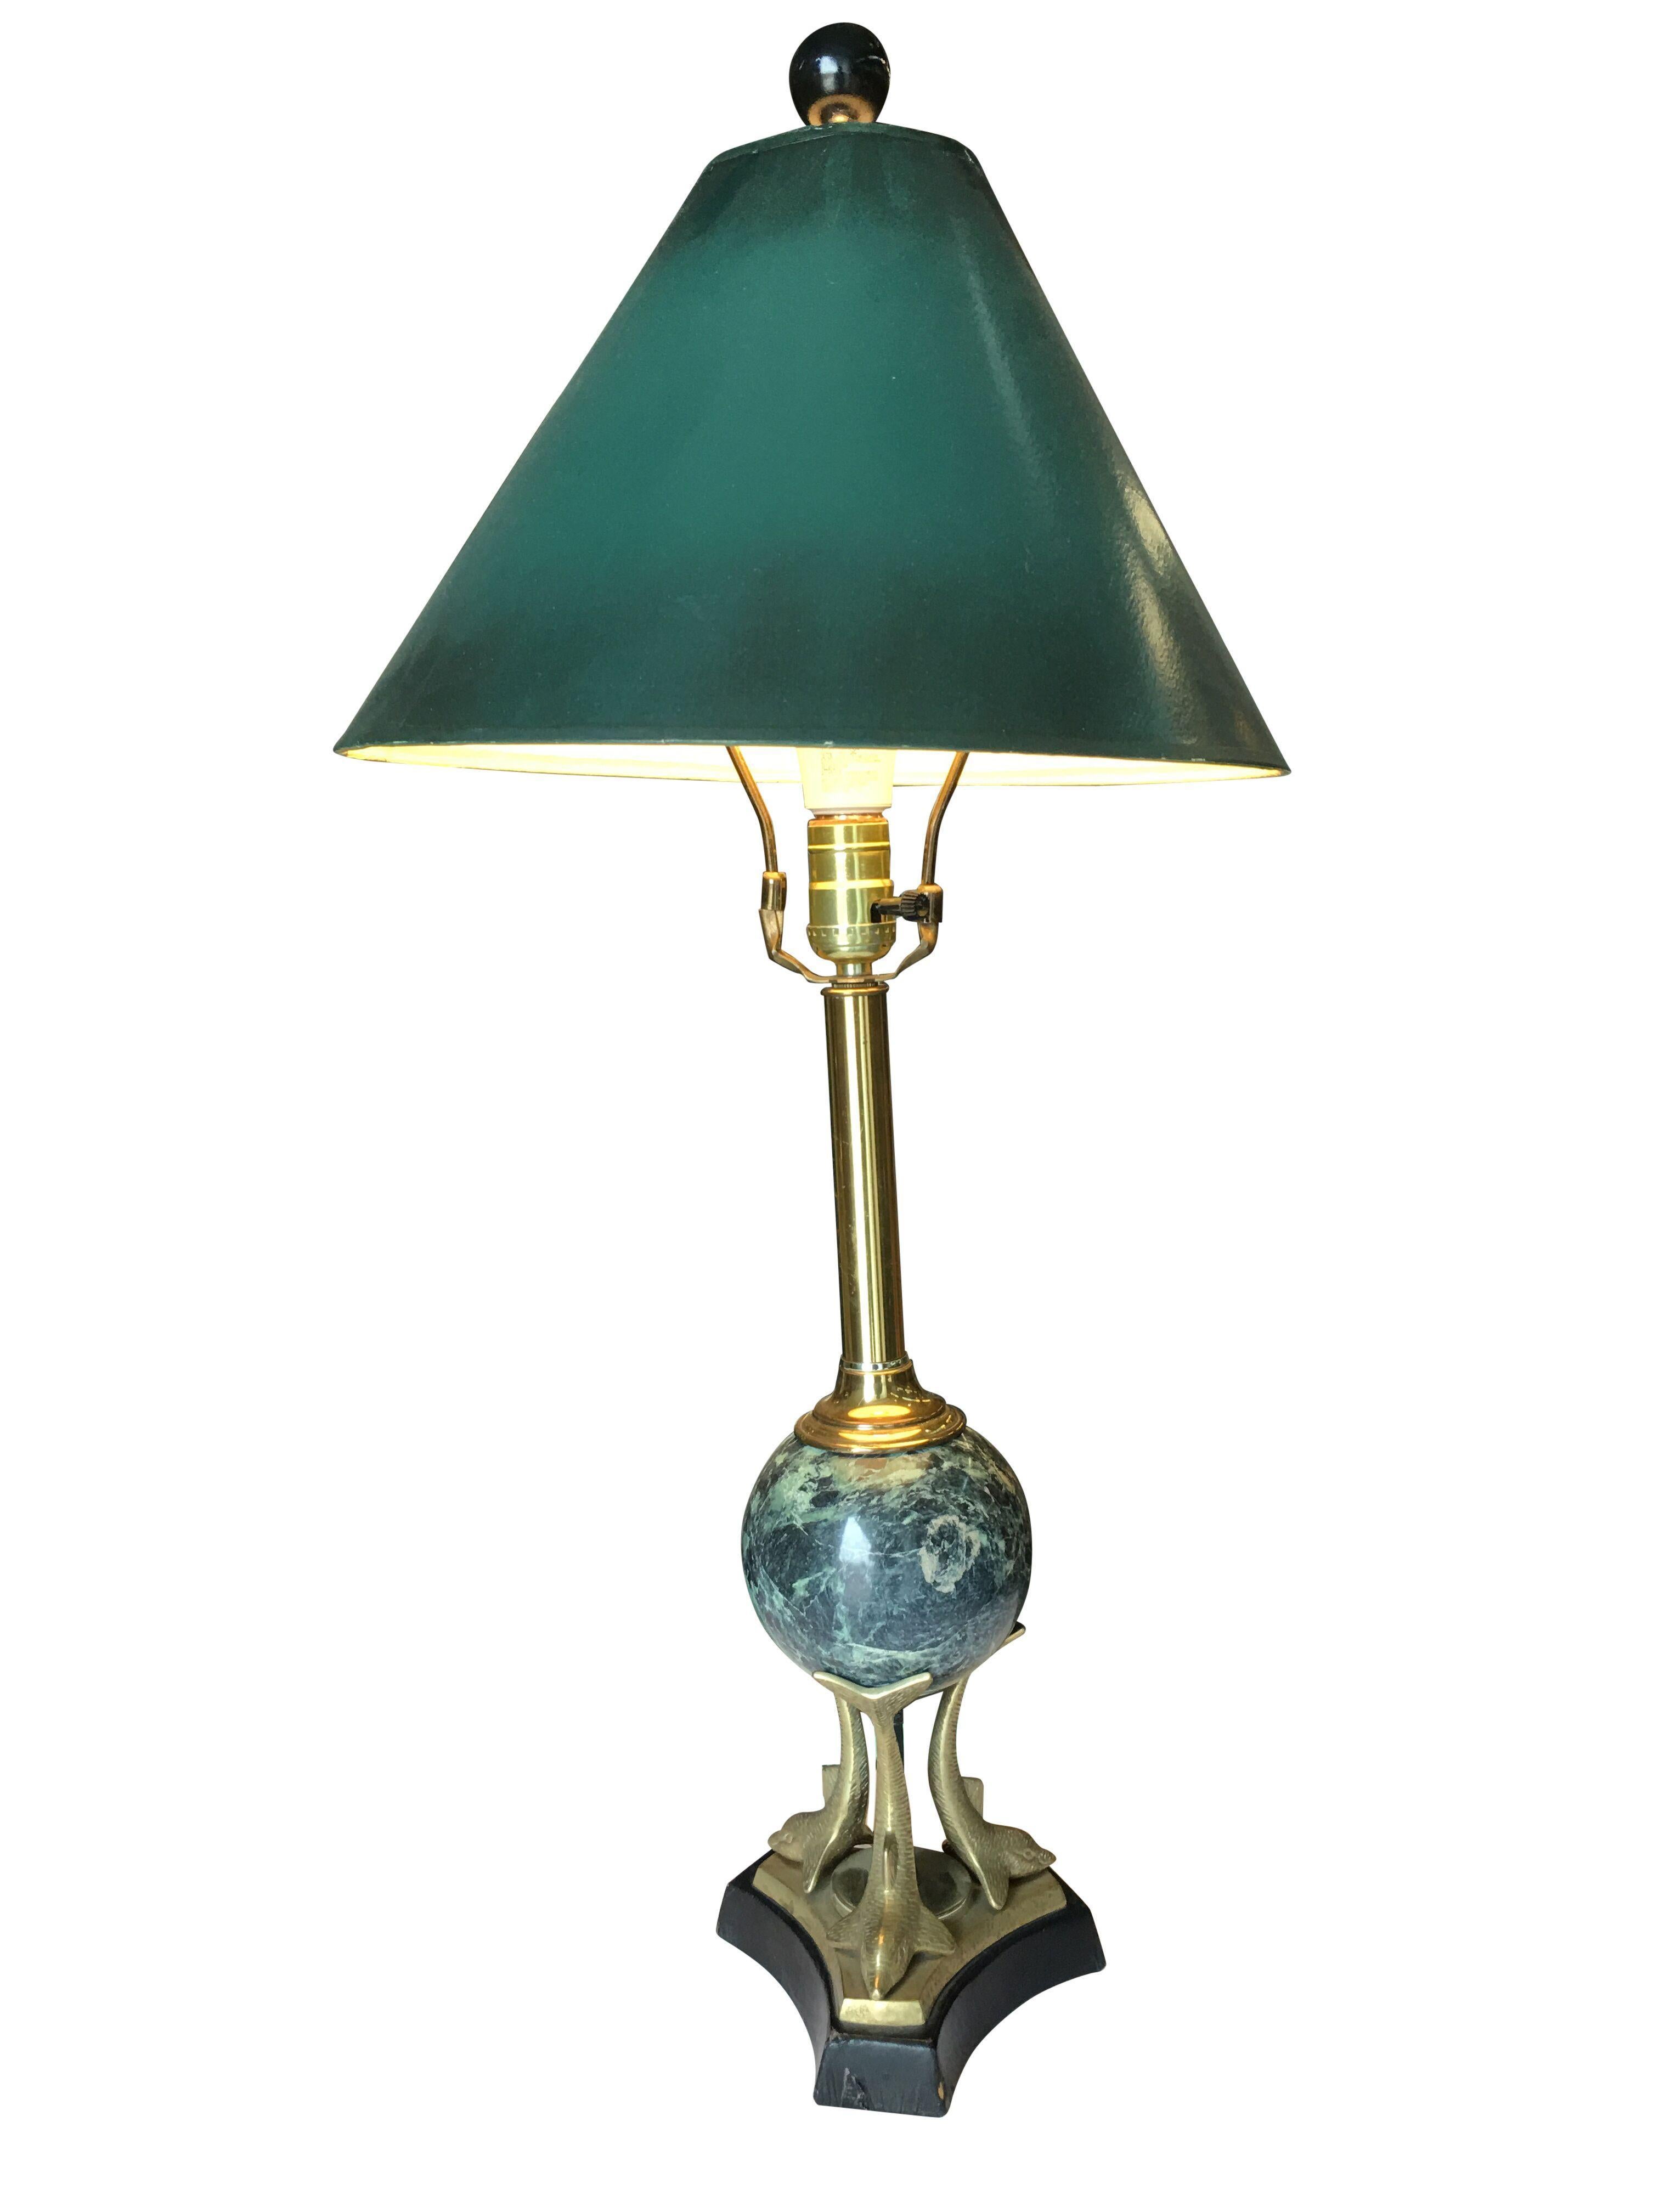 Vintage brass and marble sculptural dolphin table lamp pair. Each lamp features a green banker style shade with a sculptural lamp with a leather-wrapped wood base with a trio of brass dolphins holding up a green marble ball connected to a brass